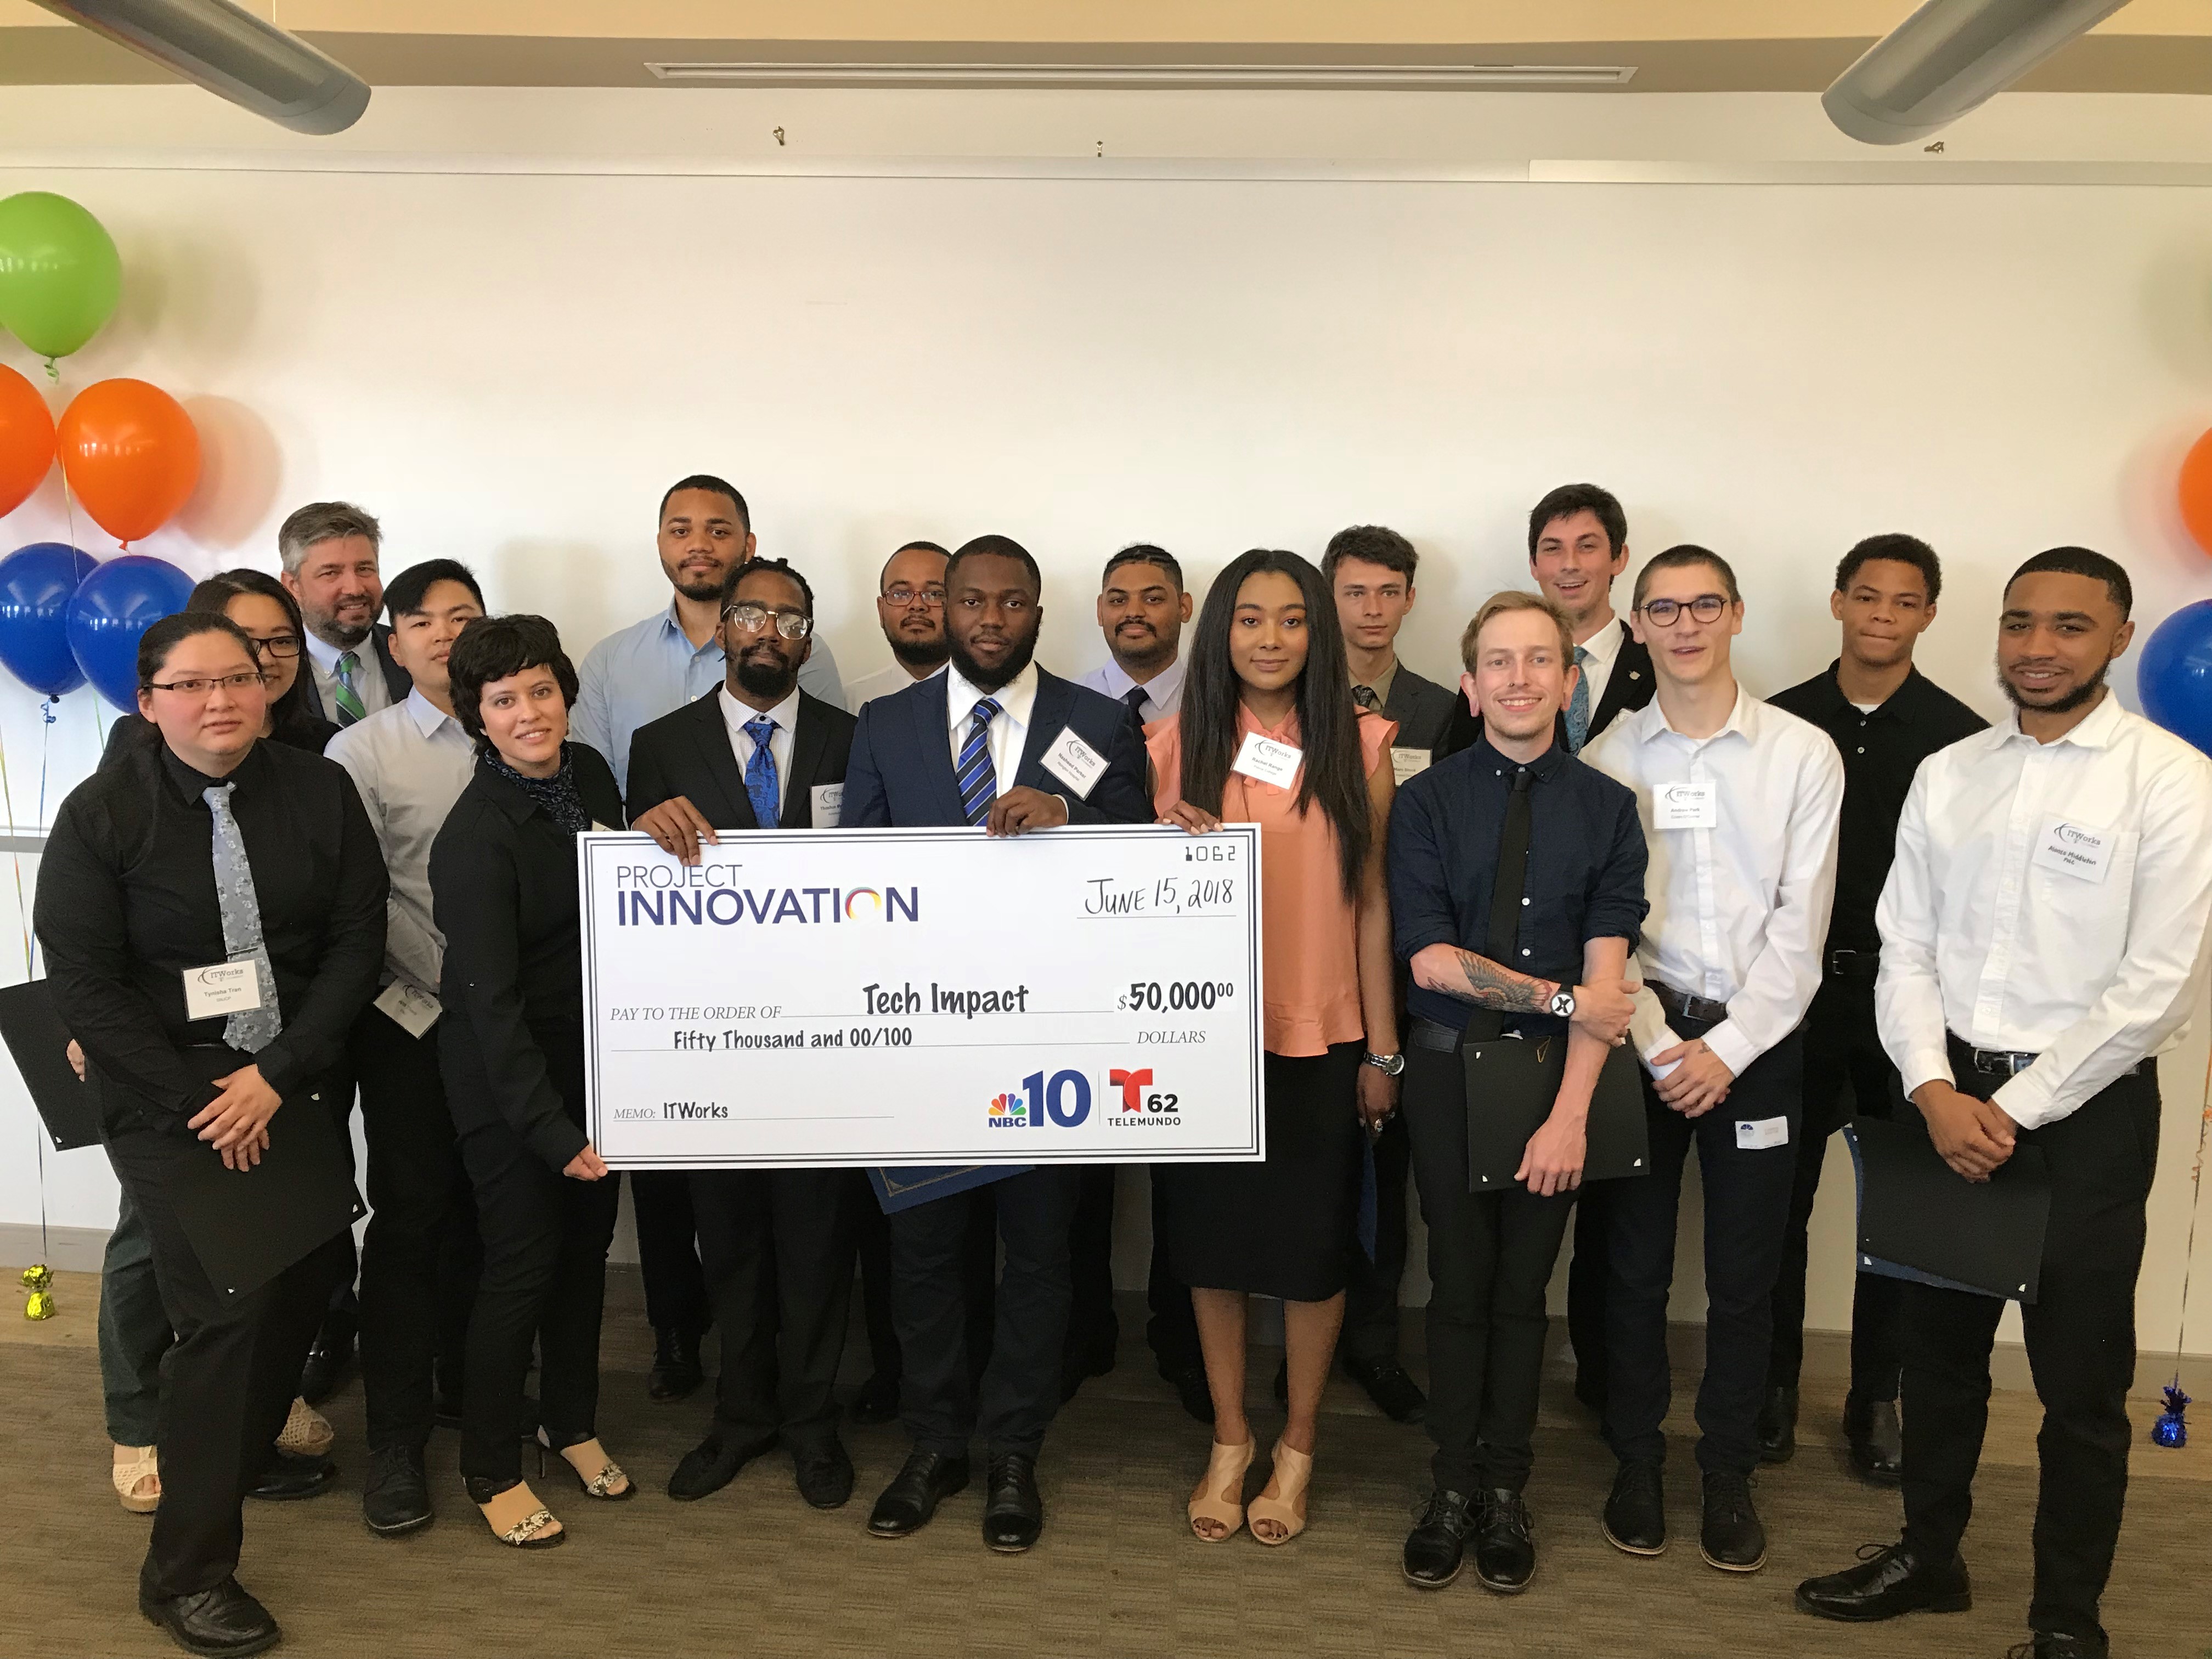 Last year NBC10 and Telemundo62 awarded a Project Innovation grant for $50,000 to Tech Impact for IT Work, an innovative program that trains young adults for careers in information technology, without needing a college degree. Photo: Courtesy of NBC10 and Telemundo62
